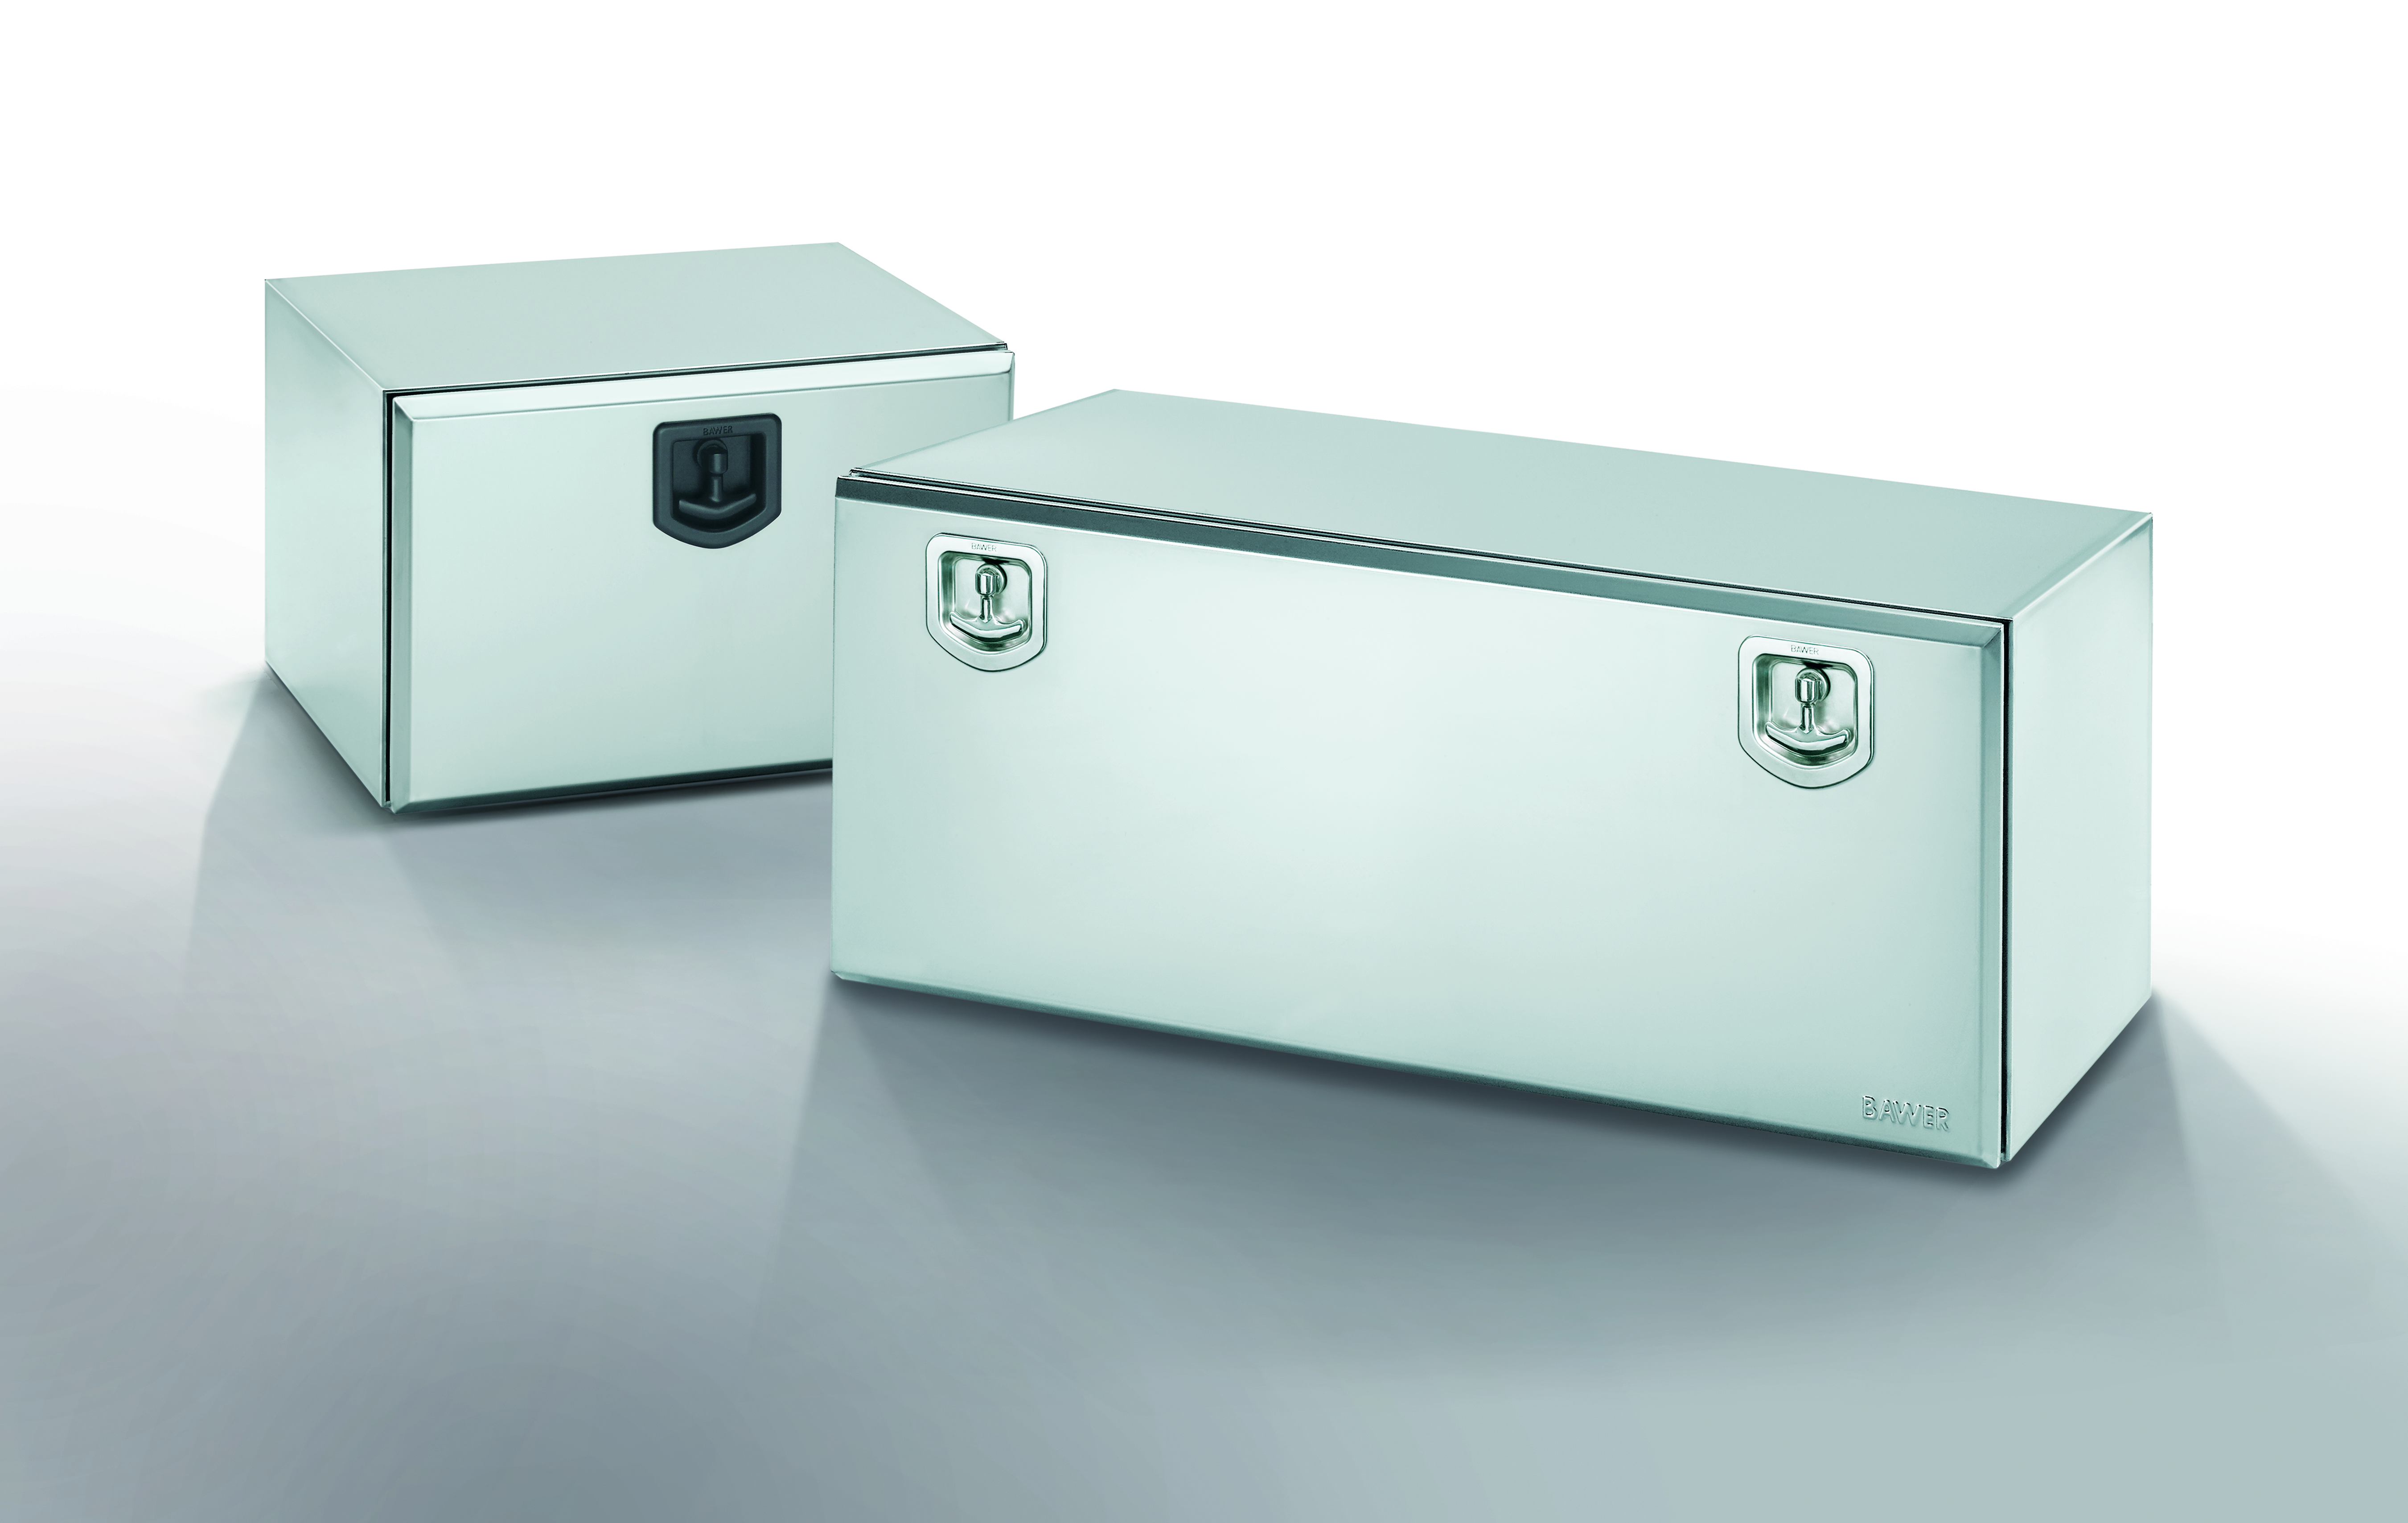 Bawer Stainless Steel Toolboxes